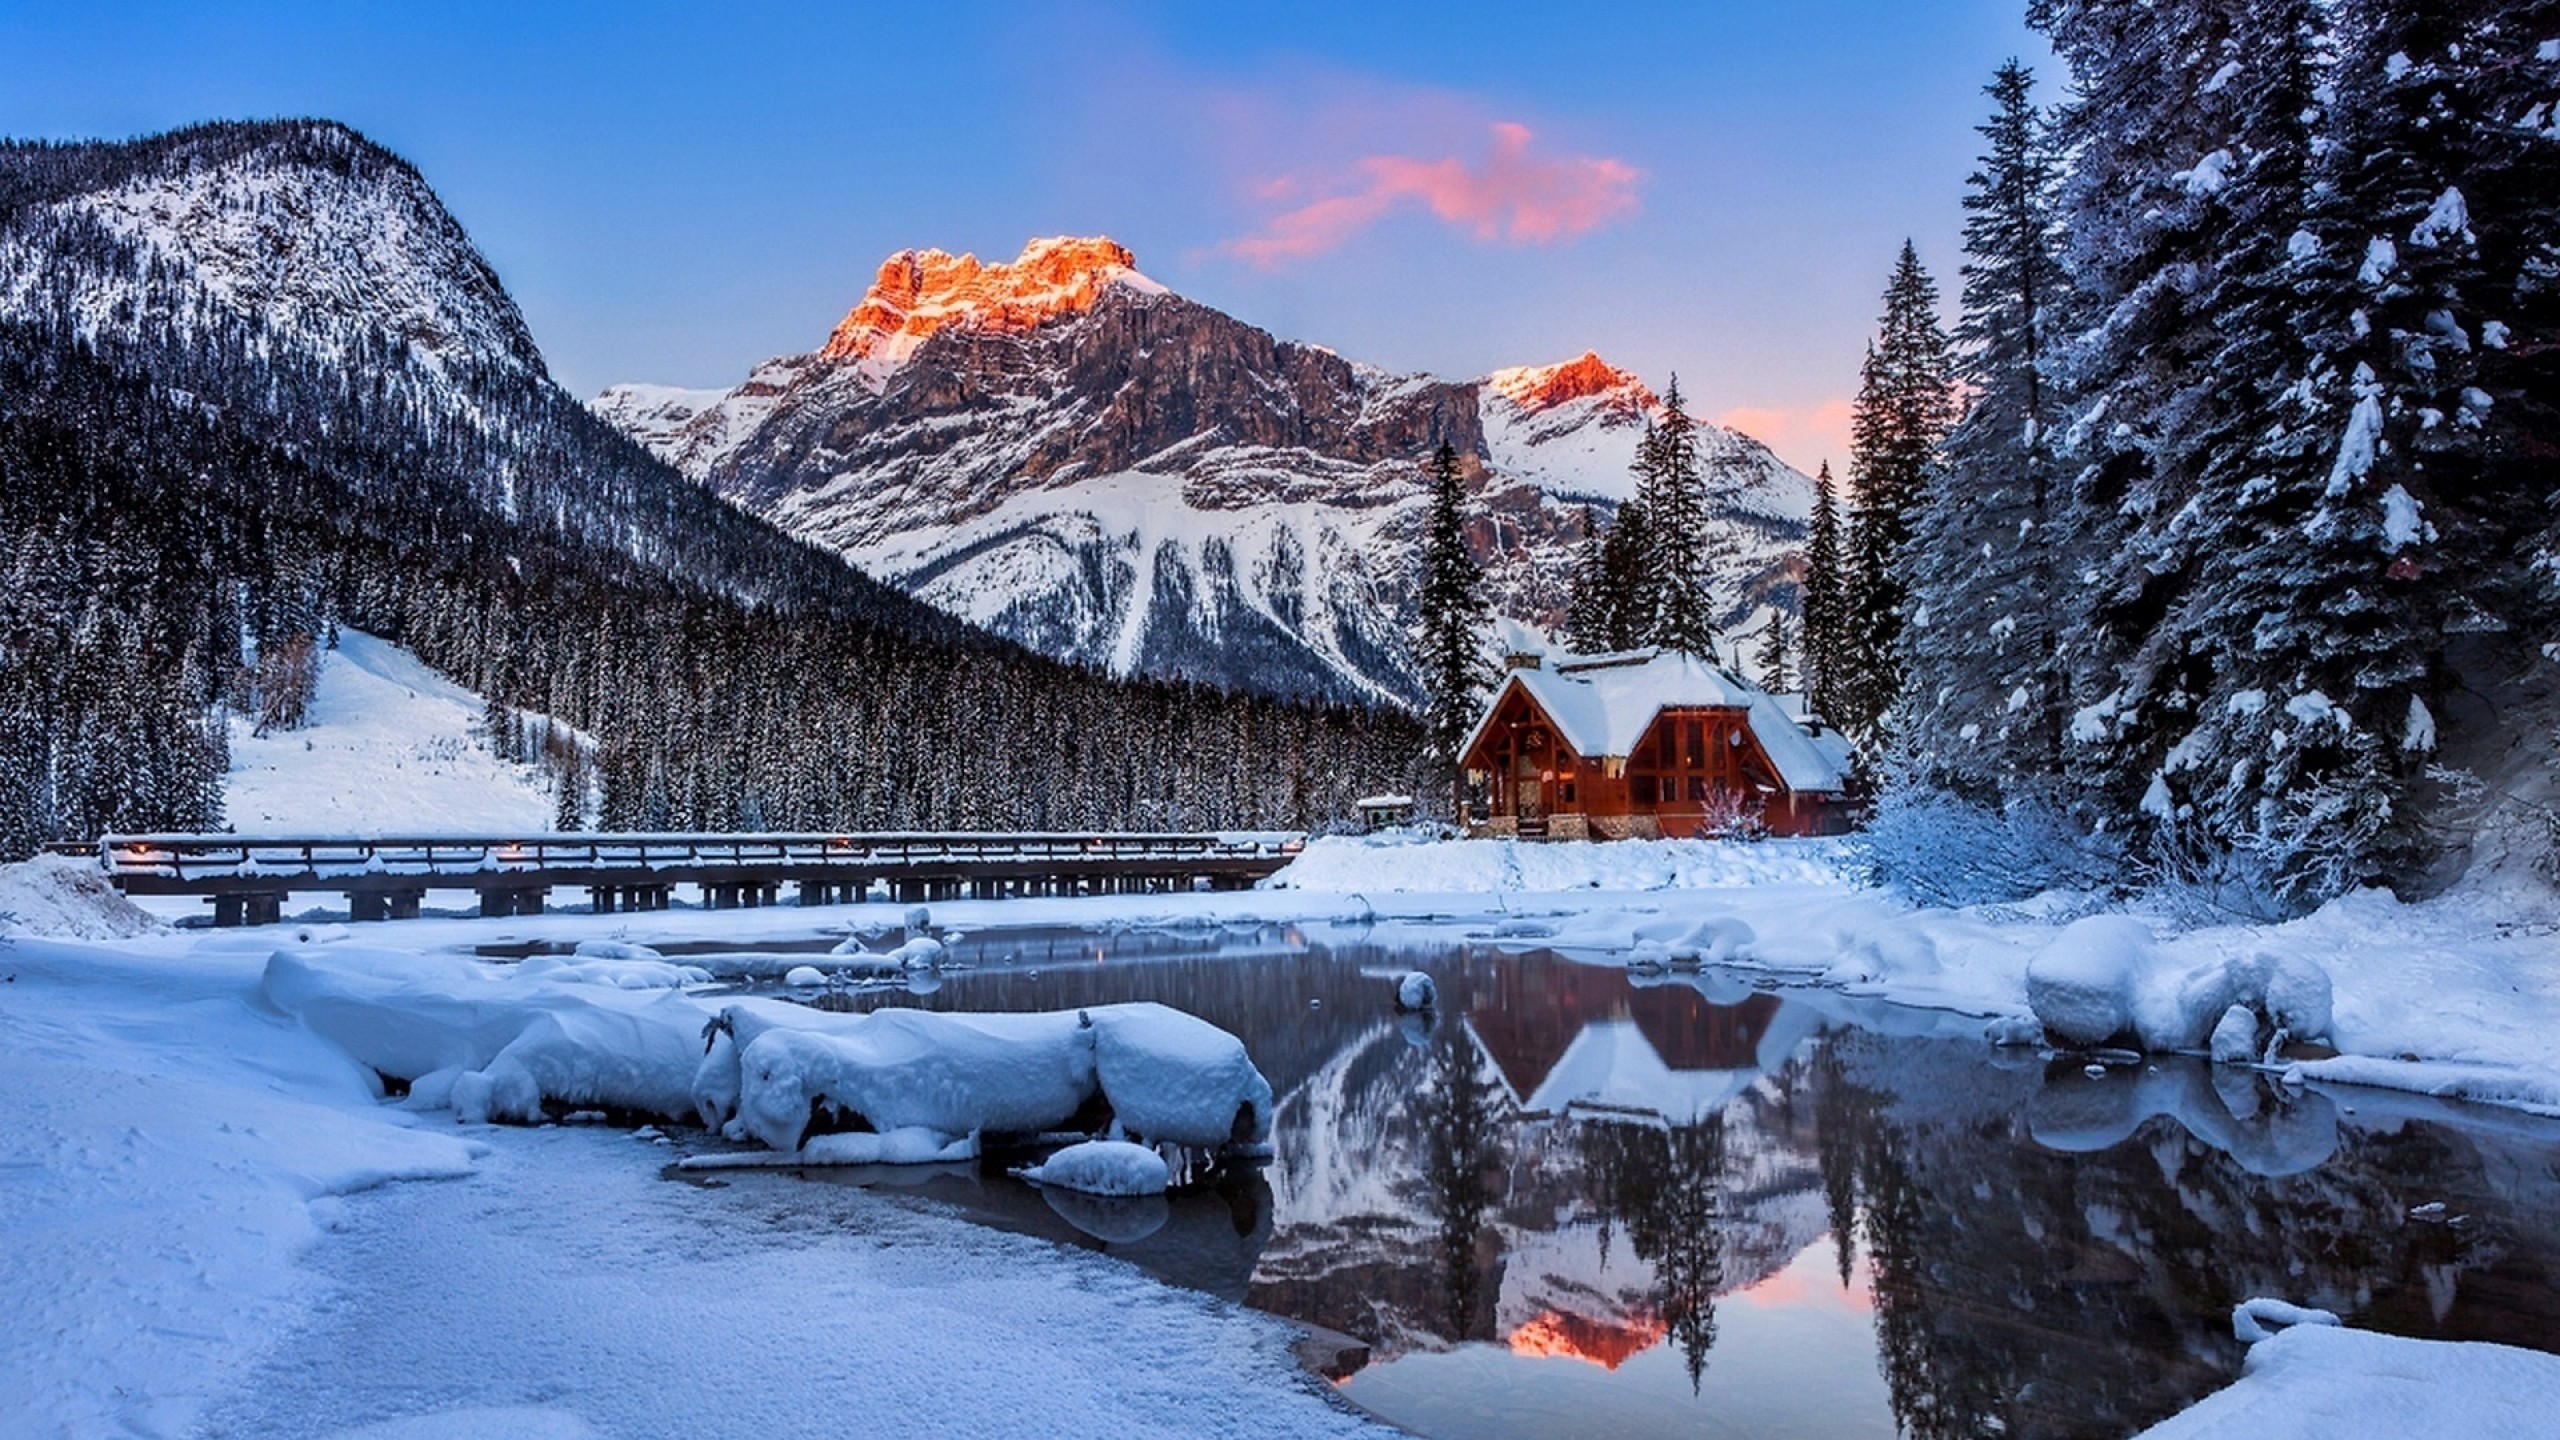 2560x1440  Winter Mountains Images For Iphone Wallpaper HD Â· 28 Â· Download Â·  Res: 1920x1080 ...